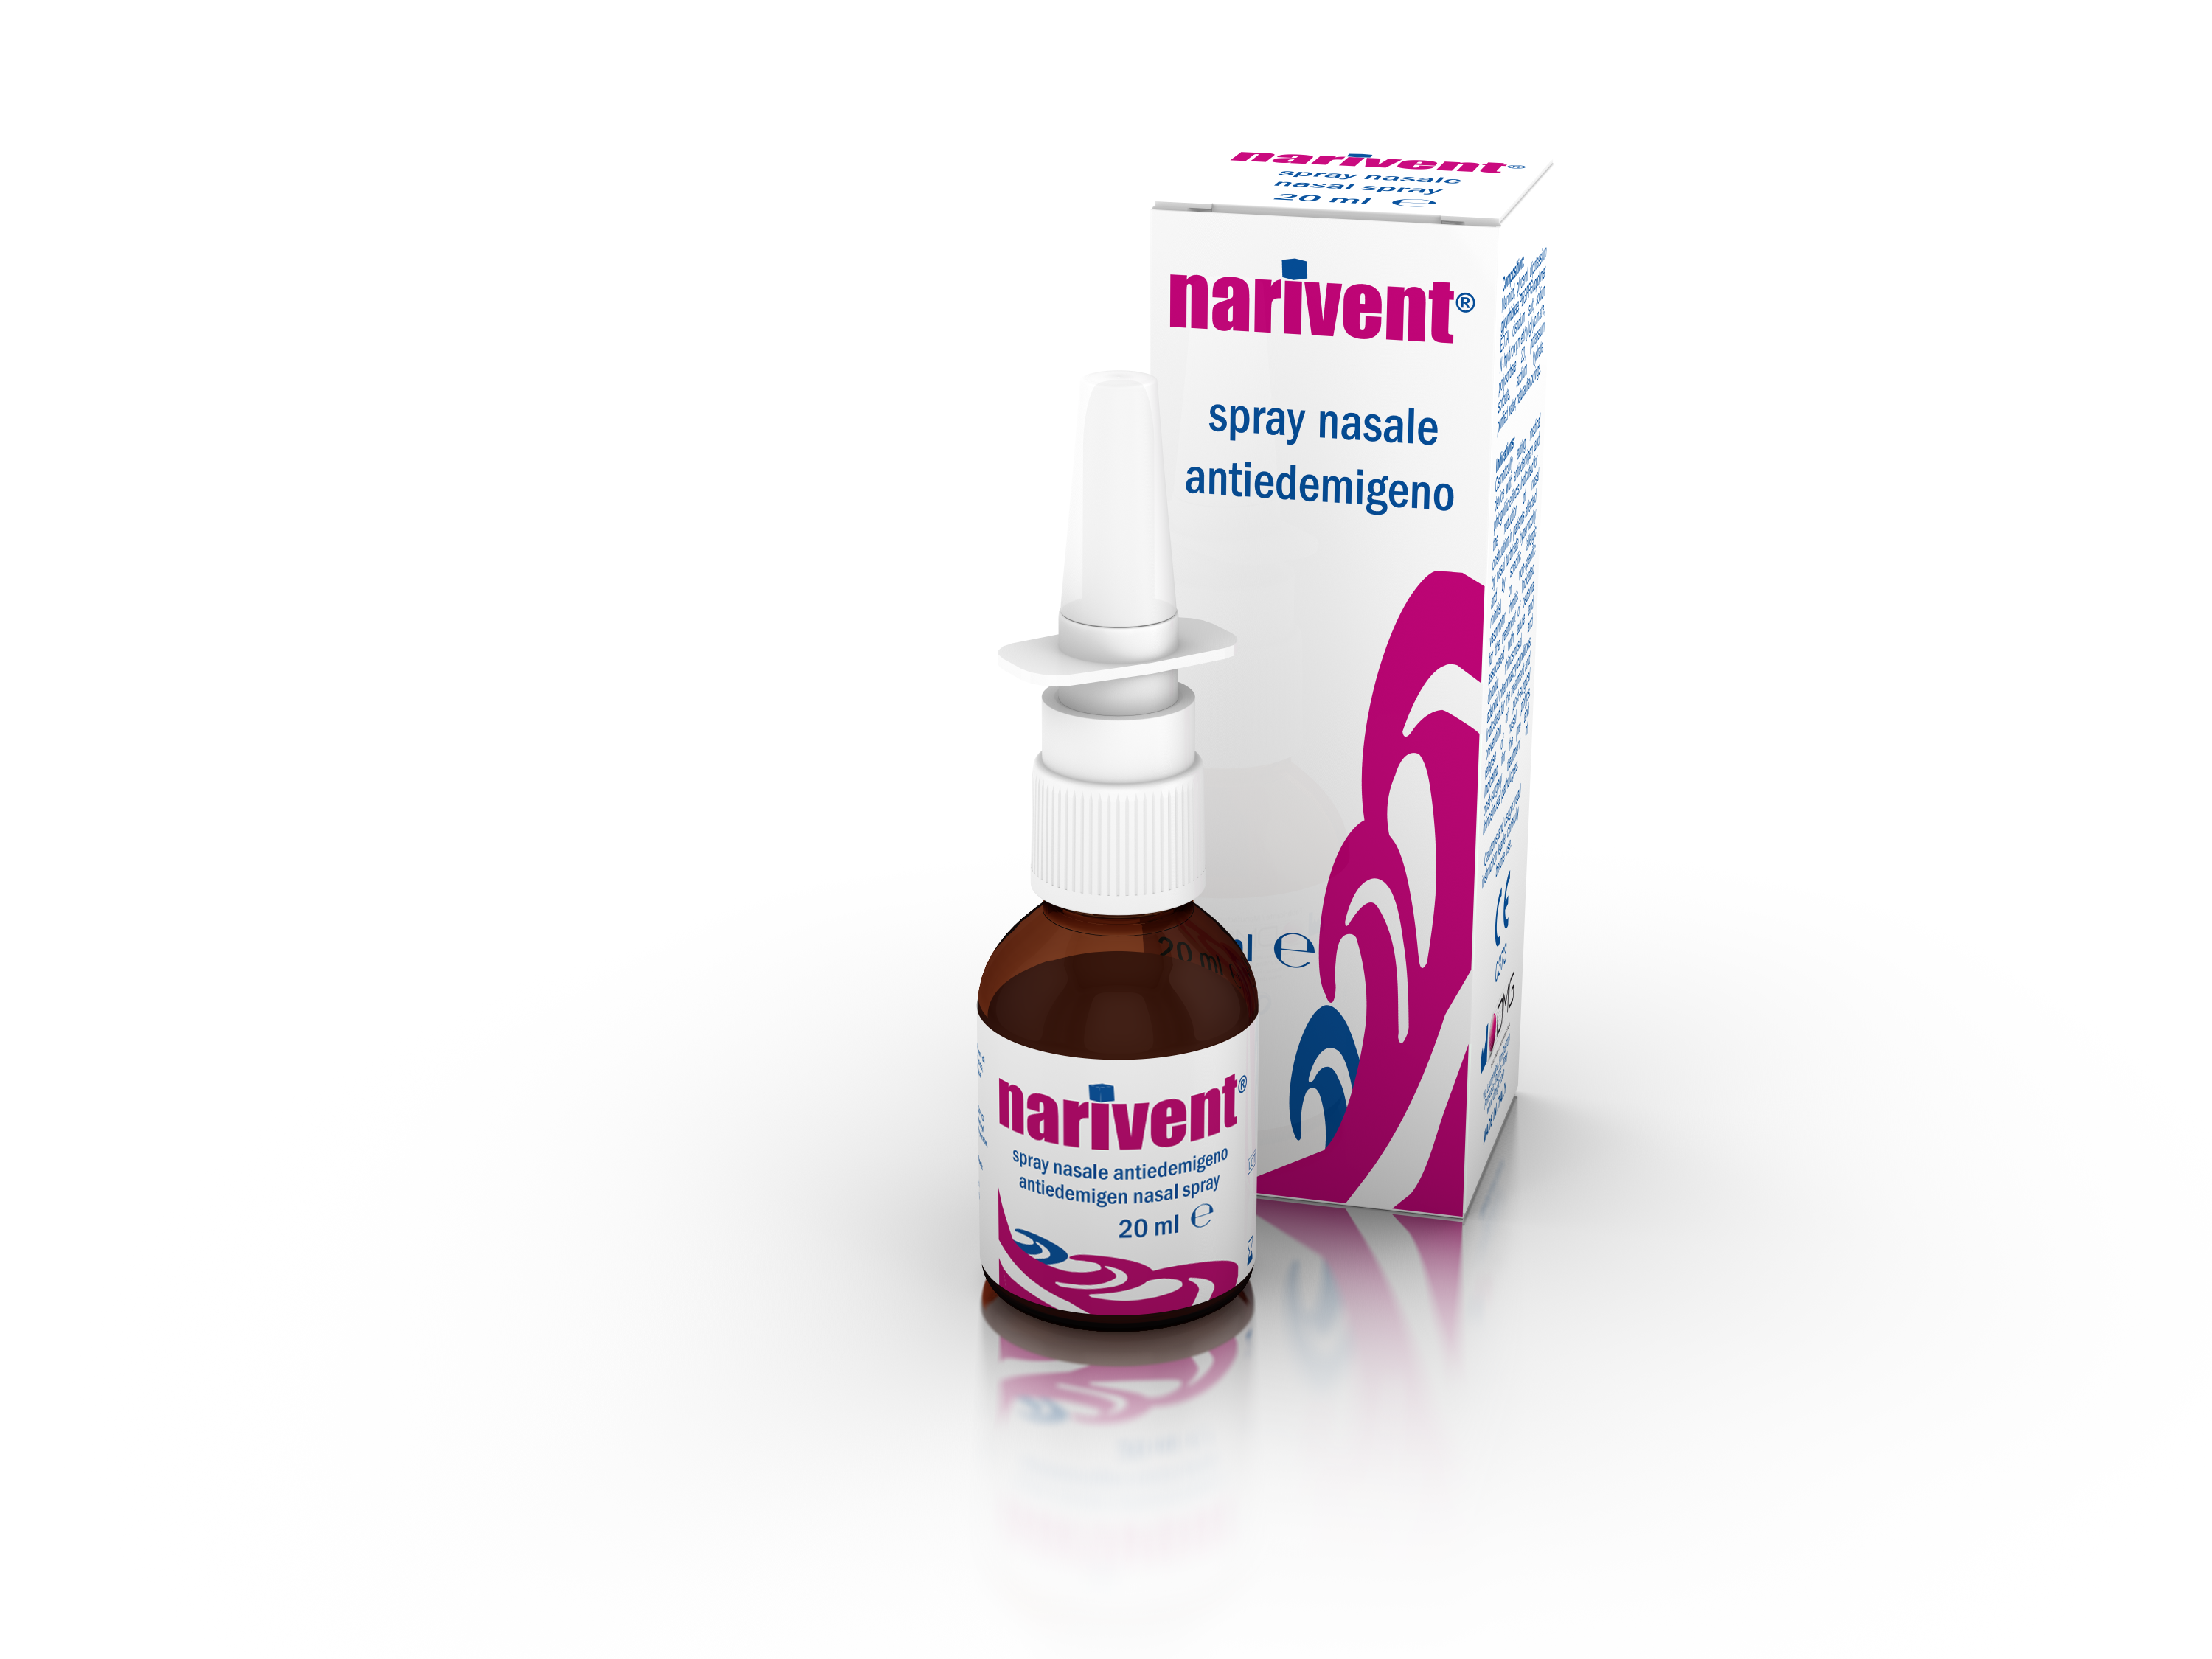 NARIVENT NASAL SPRAY - A new direction in the treatment of Inflammation - Antiedemigen Nasal Spray